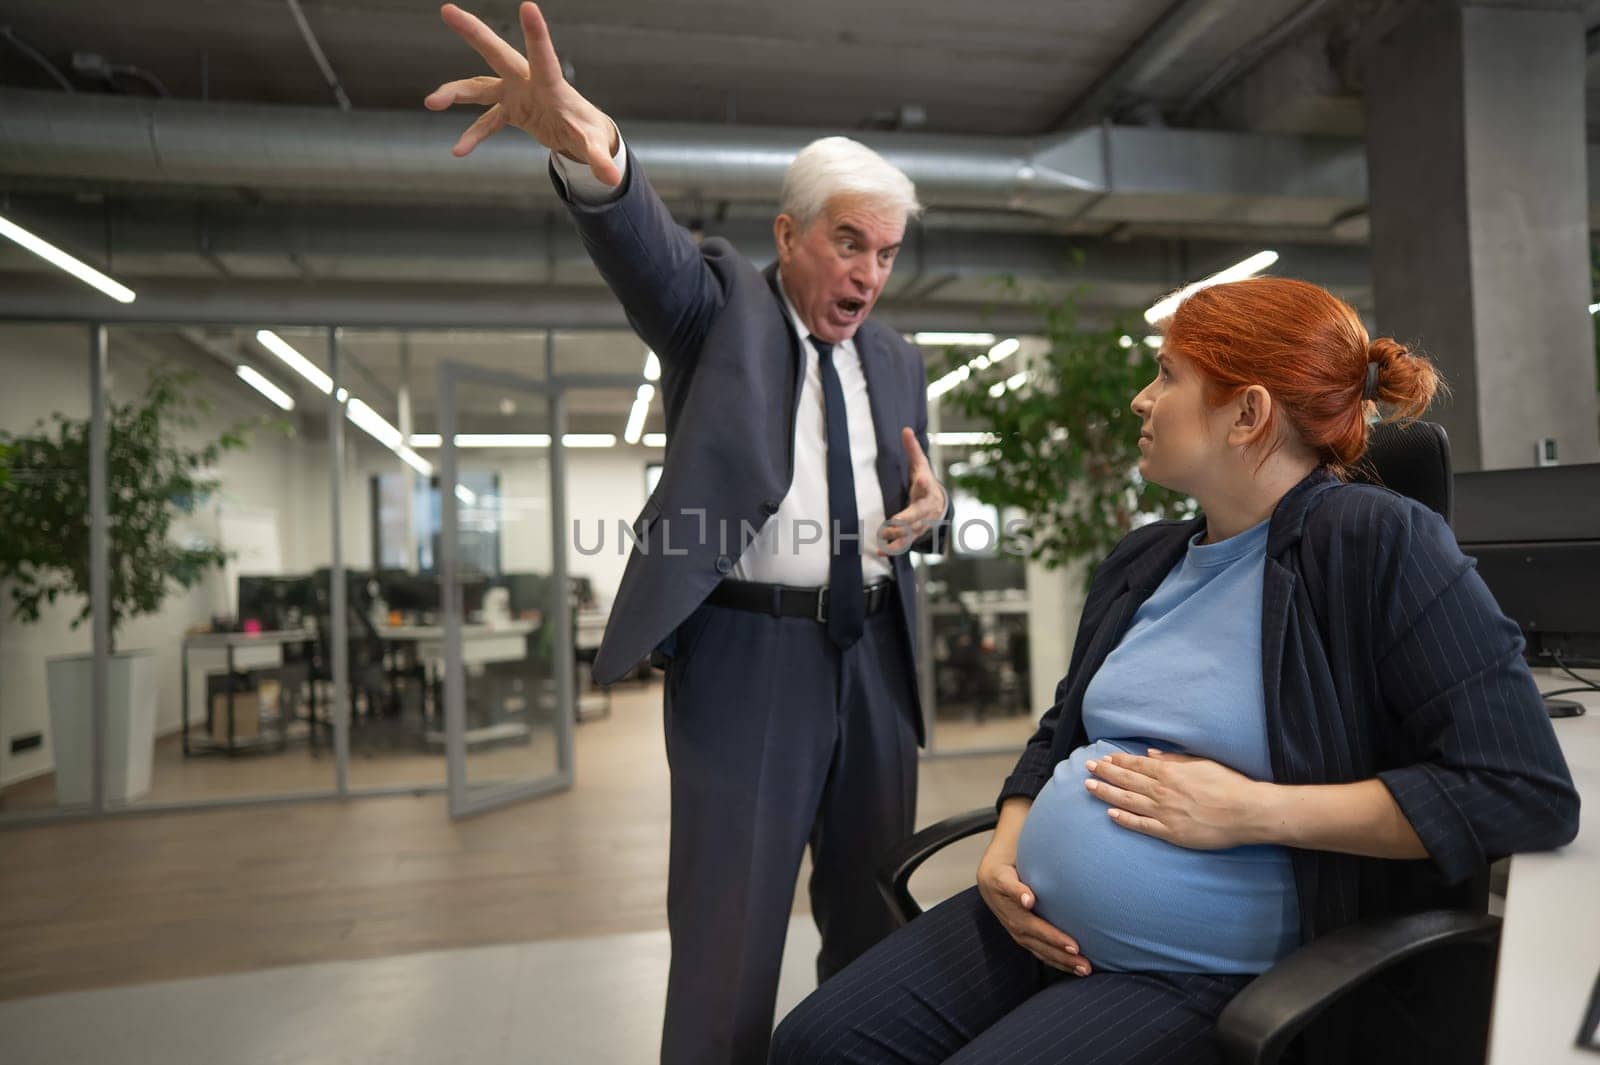 Elderly Caucasian man shouts at pregnant submissive woman and points to the door